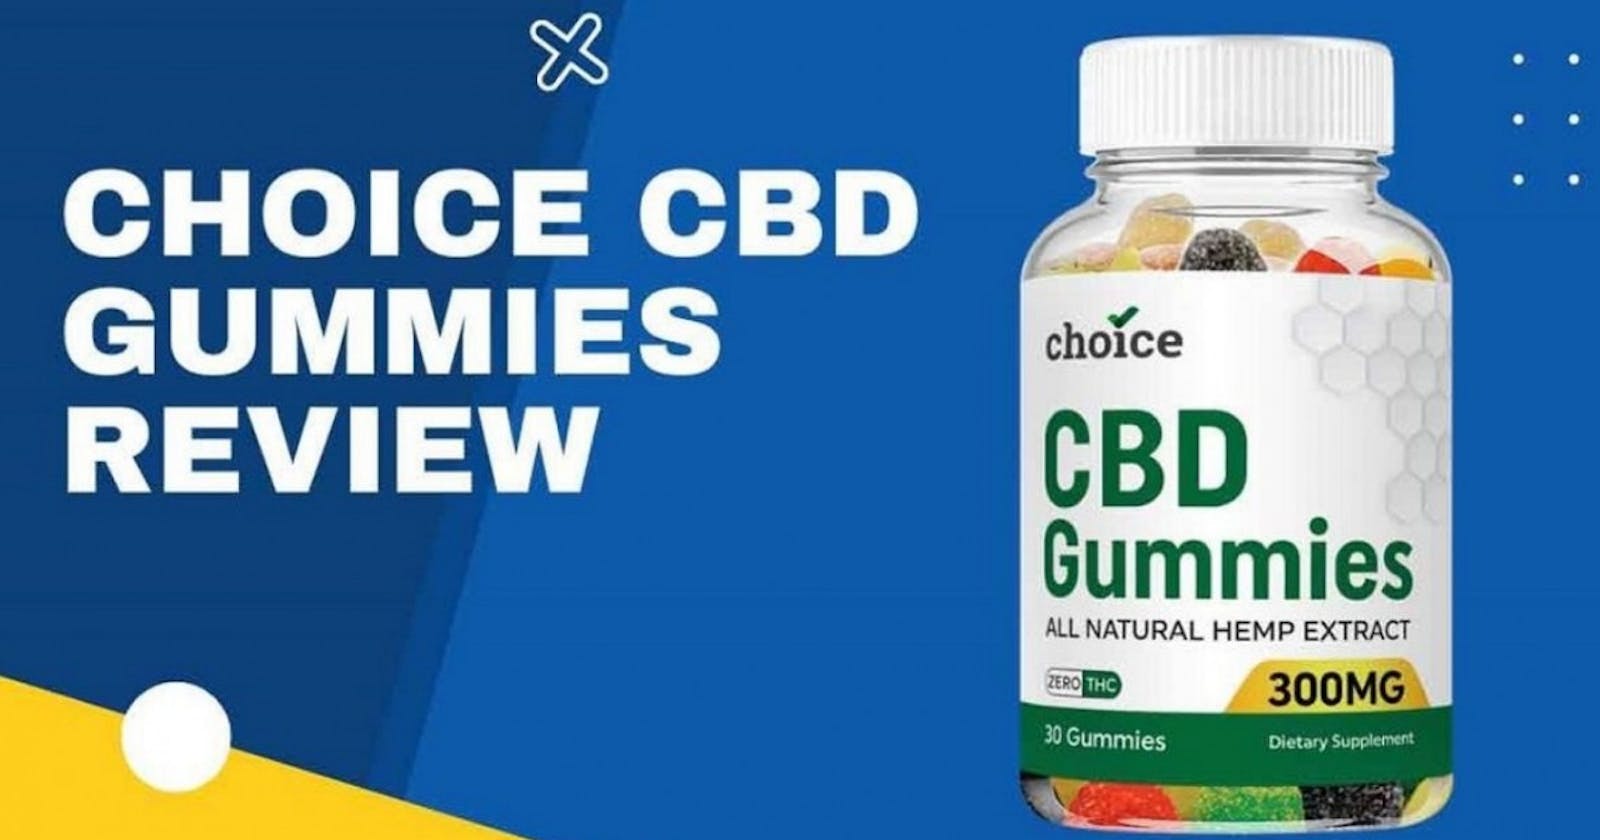 Choice CBD Gummies Reviews: Fact Check - Risky Negative "Side Effects" Exposed?